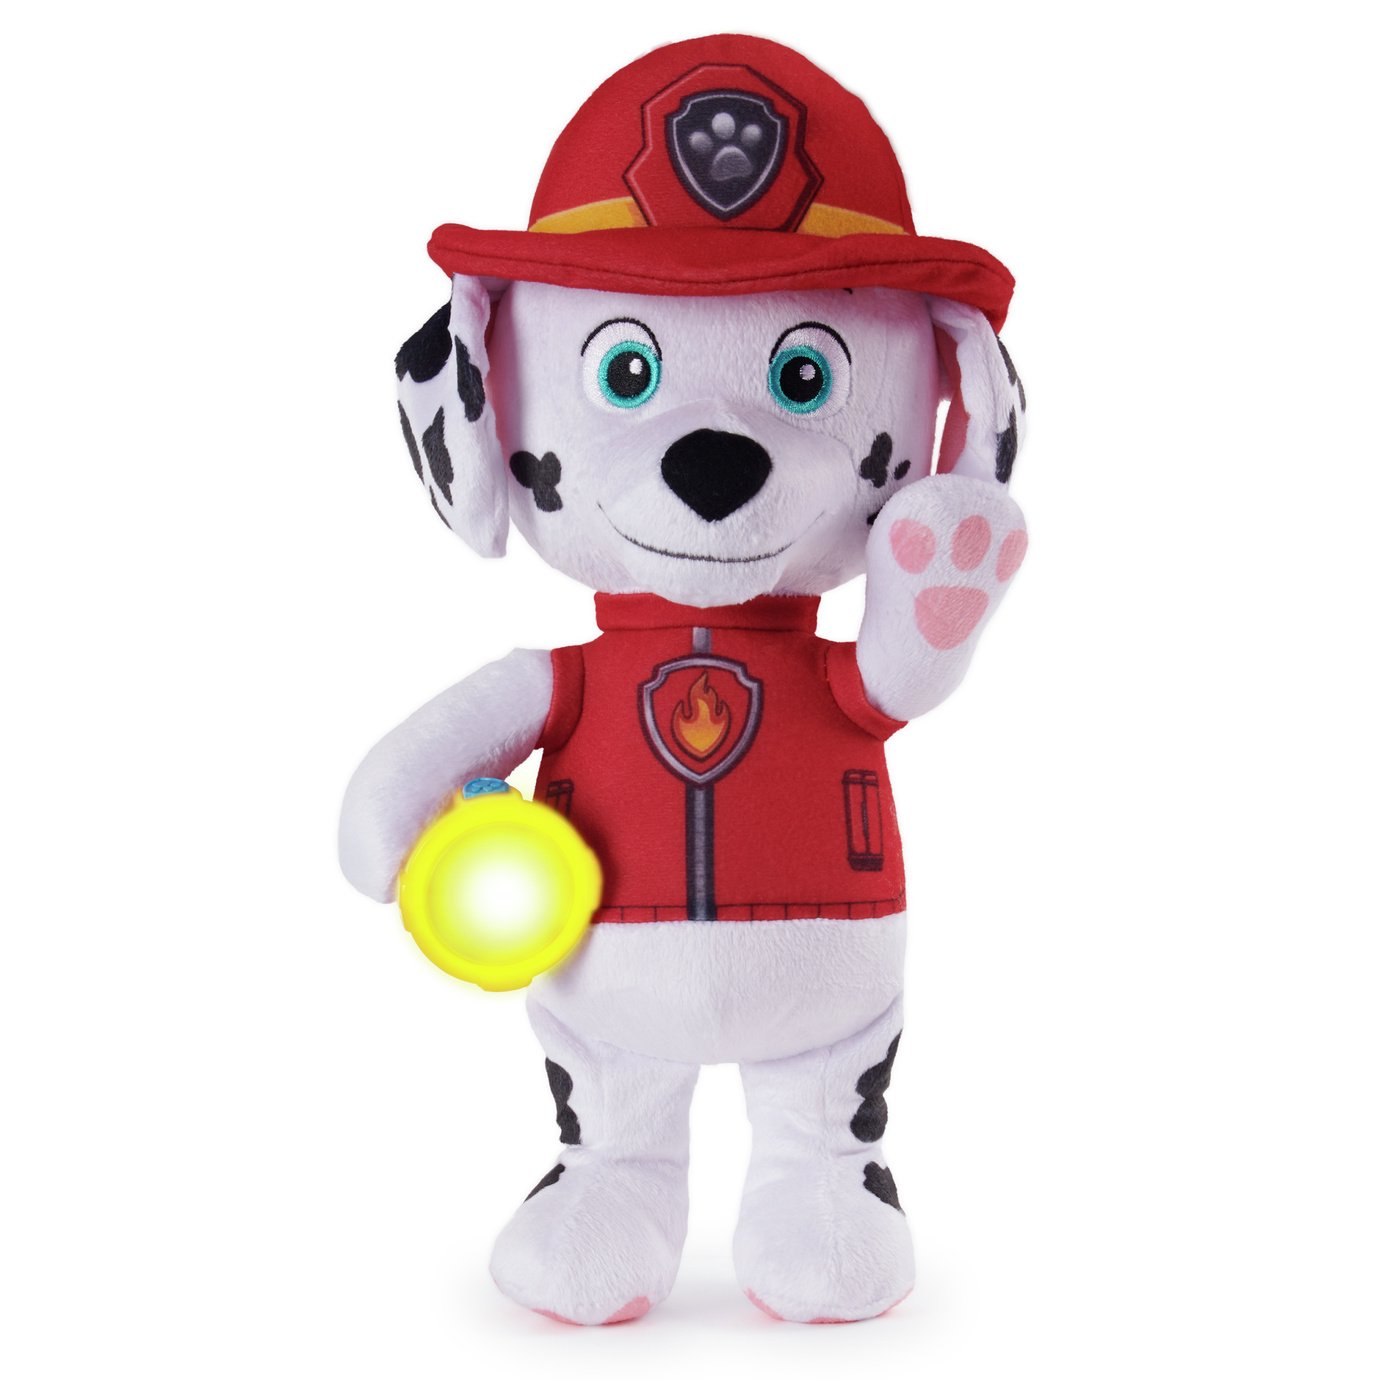 PAW Patrol Snuggle Up Marshall Soft Toy Review